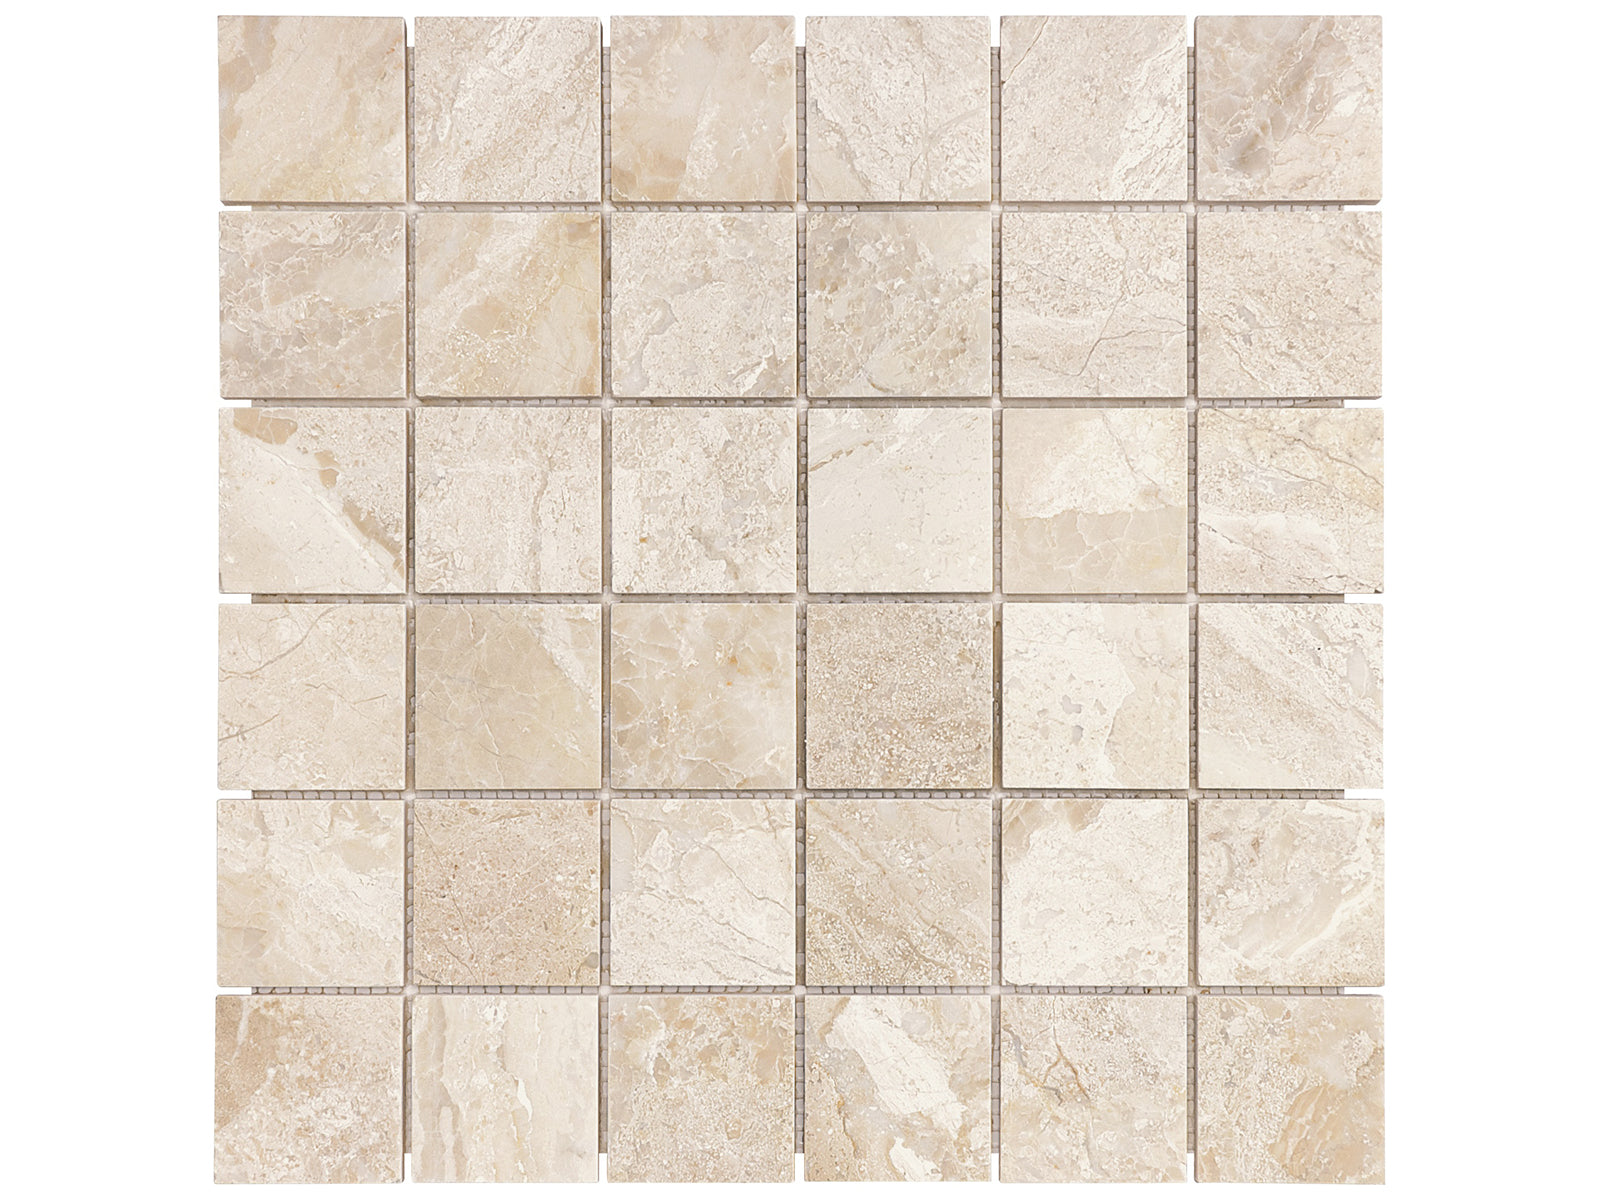 2 X 2 In Impero Reale Polished Marble Mosaic